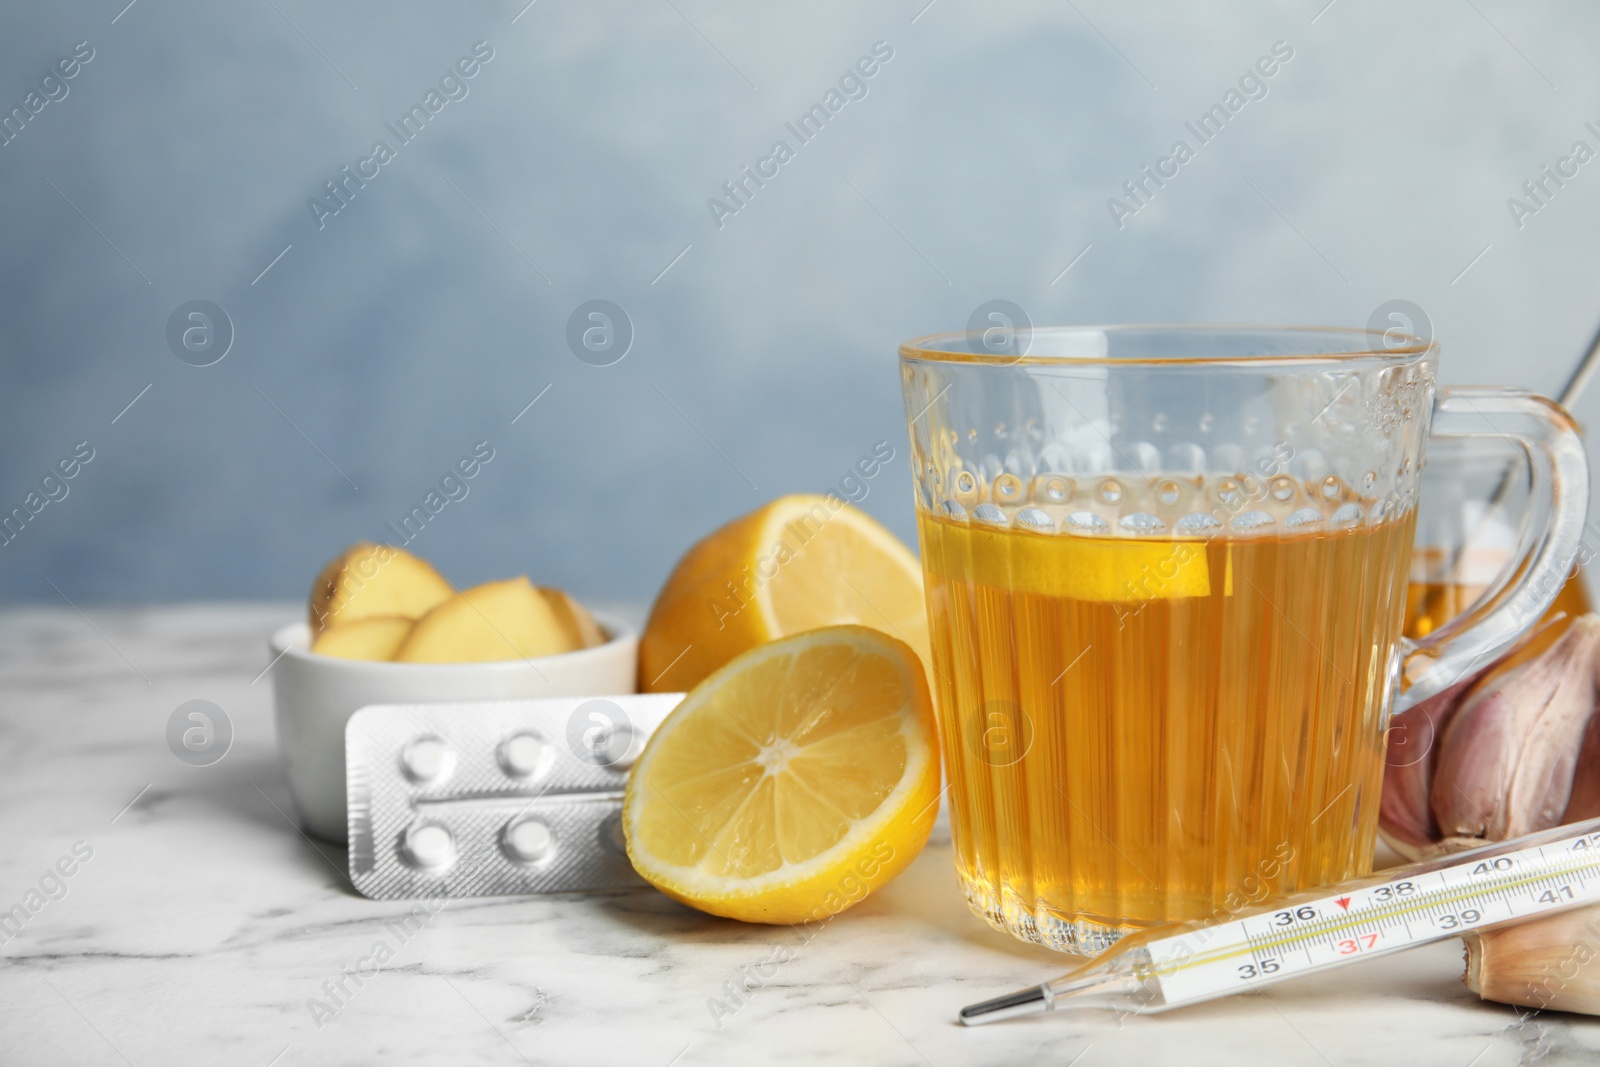 Photo of Composition with cold remedies on marble table against blue background. Sore throat treatment